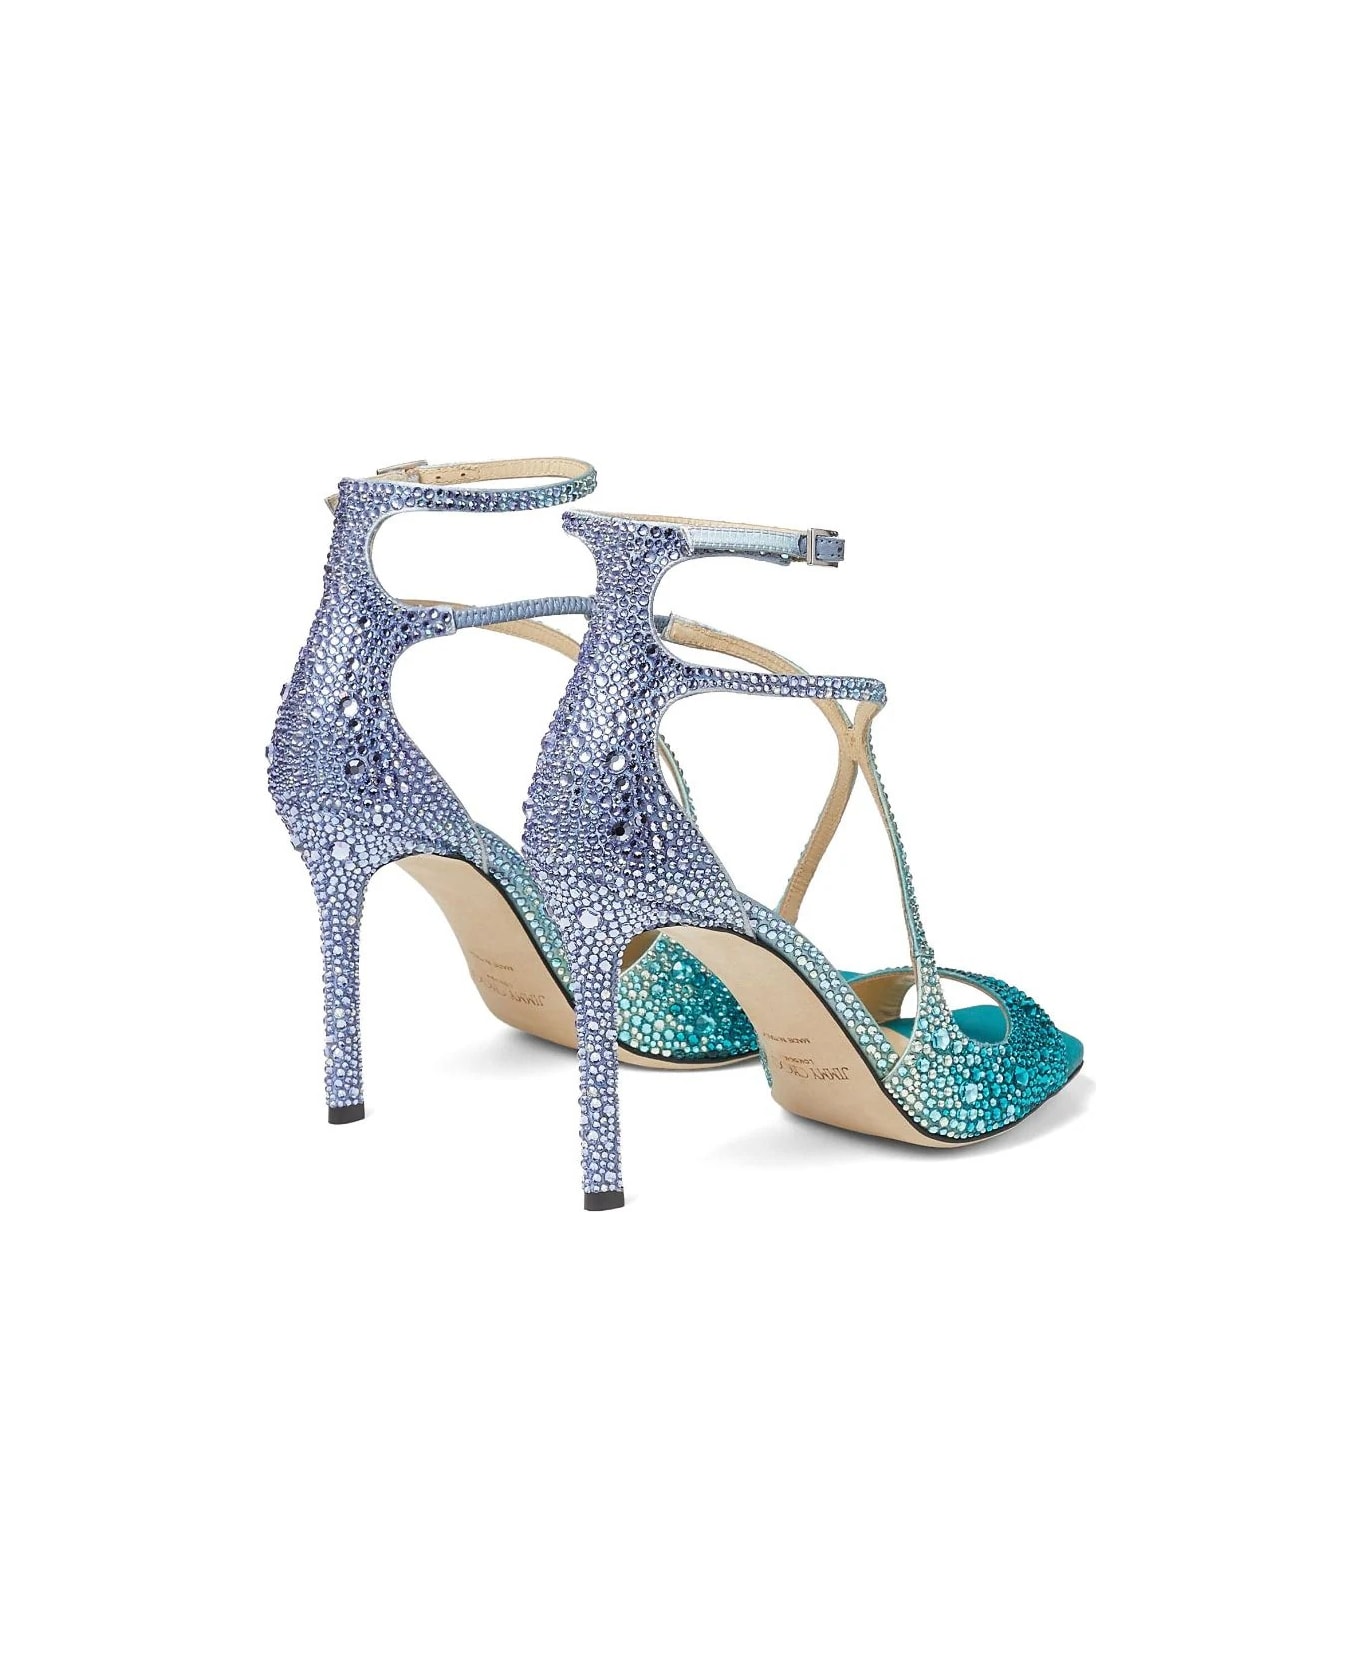 Jimmy Choo Azia 95 Sandal In Blue Peacock With Crystals - Blue